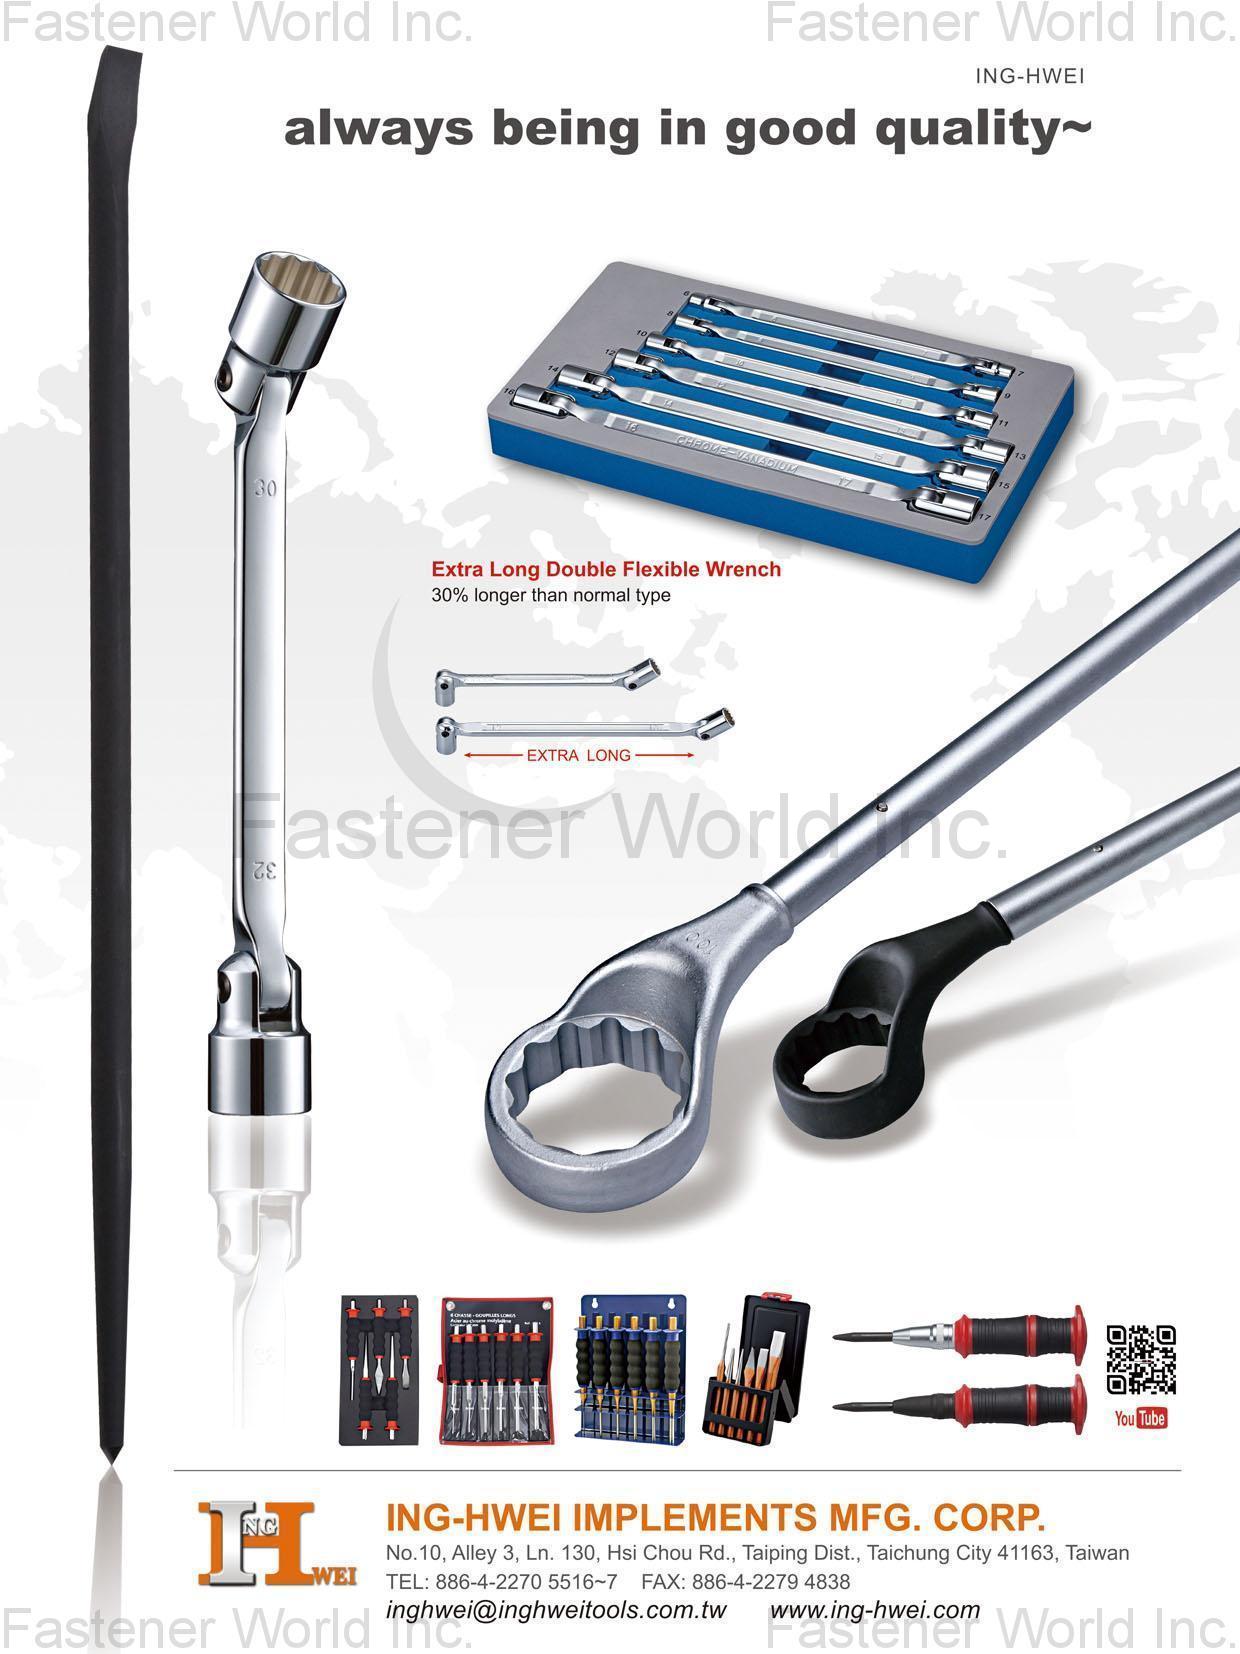 Socket Wrench Sets & Sockets,Flare Nut Wrenches,Sockets,Punch Pins,Chisels